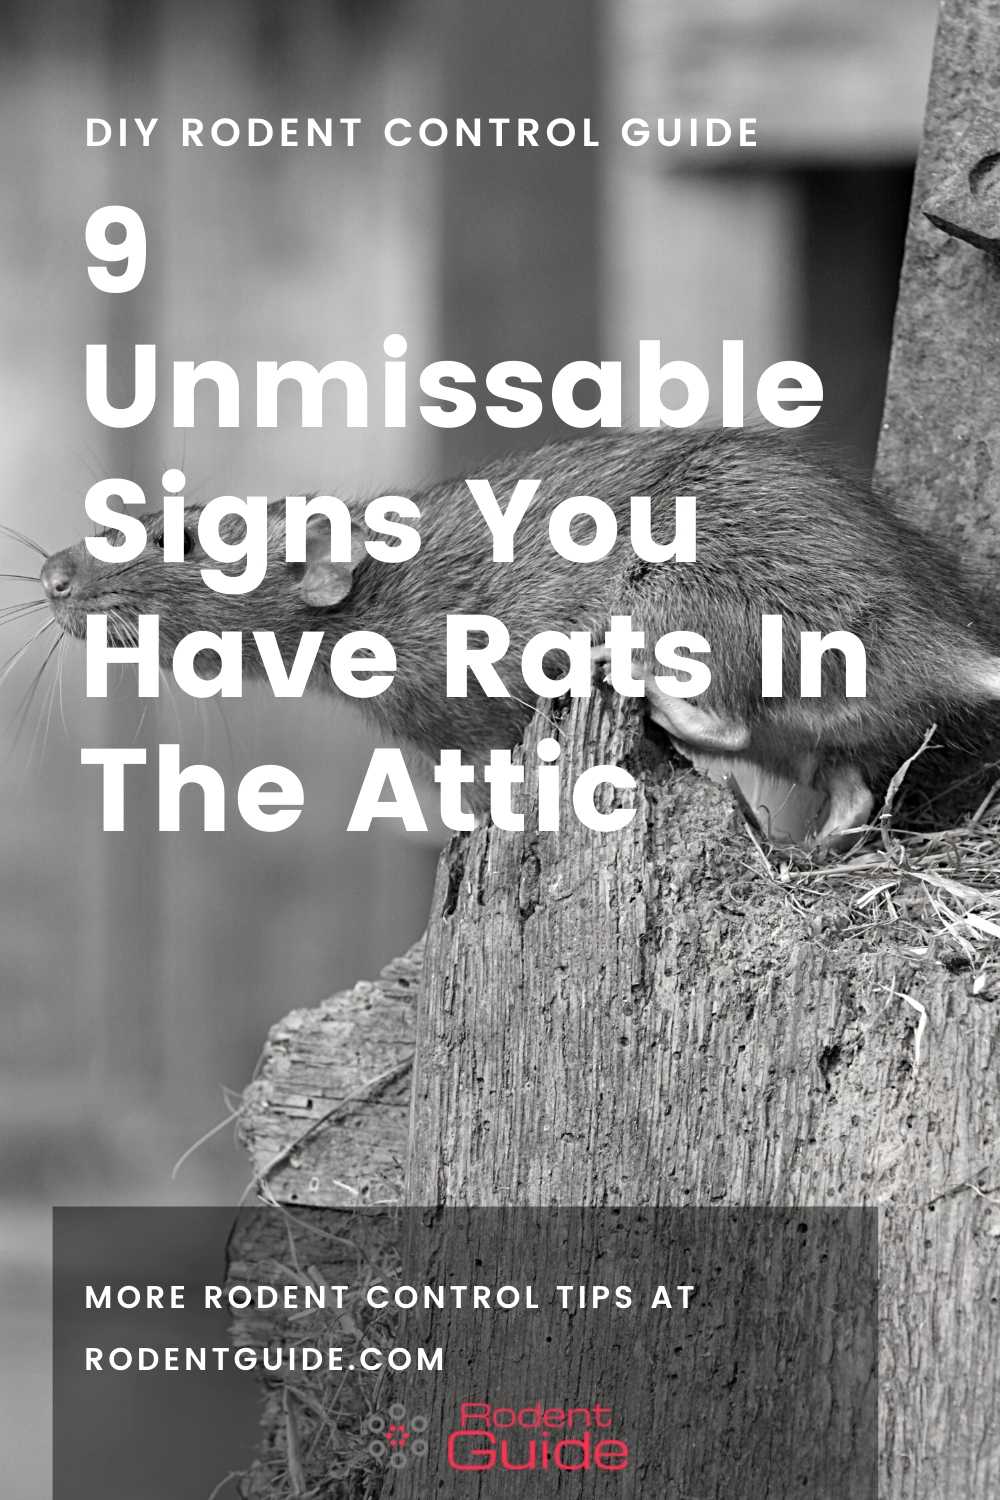 Signs You Have Rats In The Attic